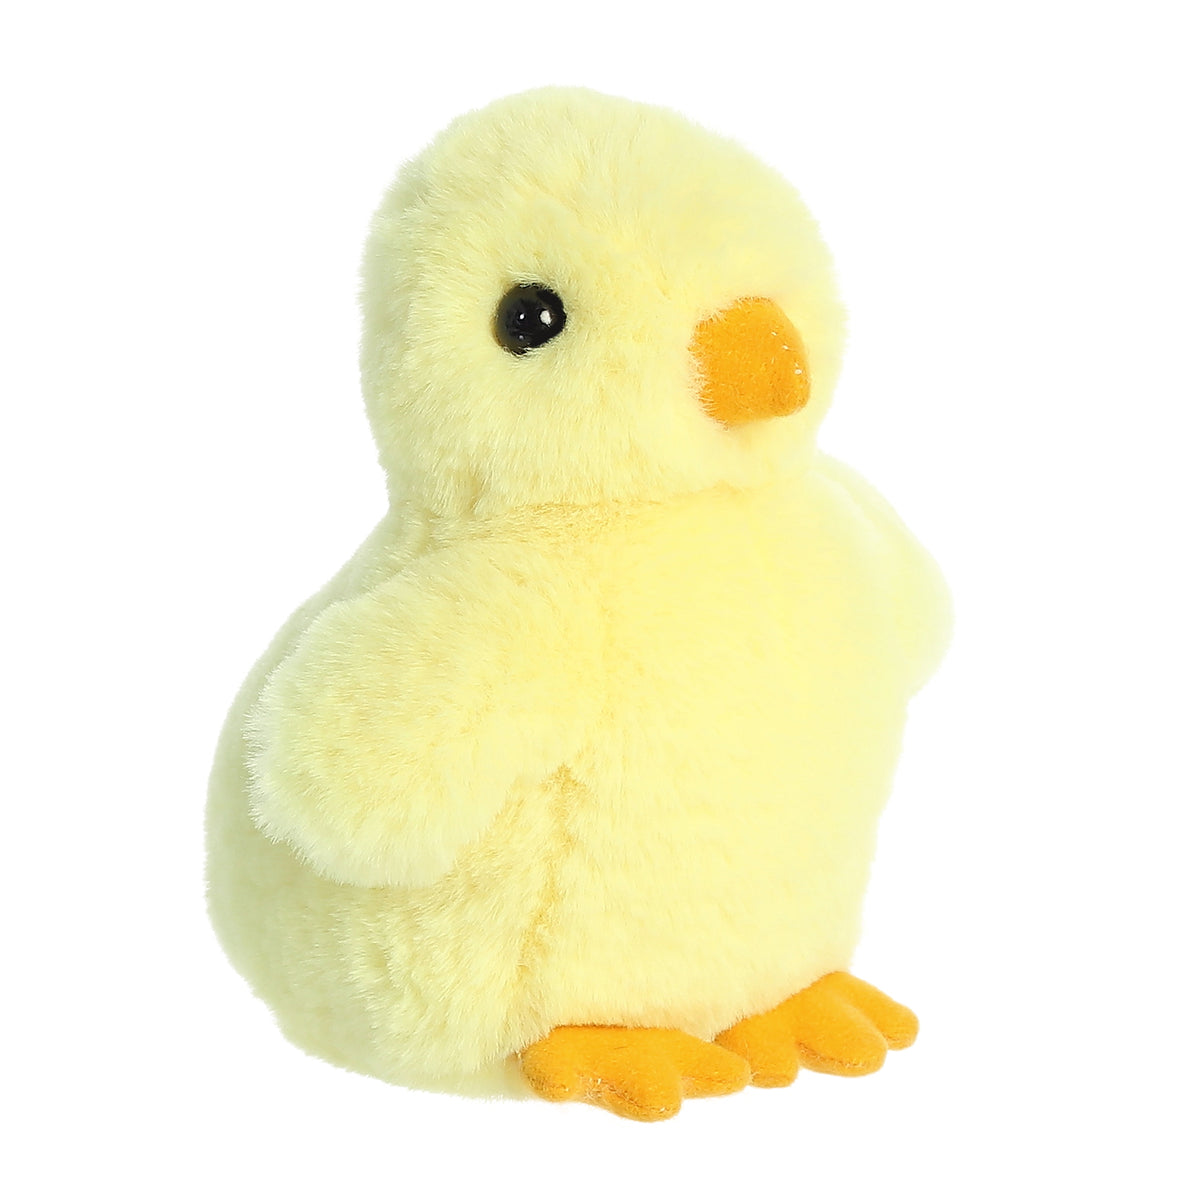 Bright yellow cheeky chick stuffed animal plush with a vibrant orange beak and feet for extra cheerful cuddles.